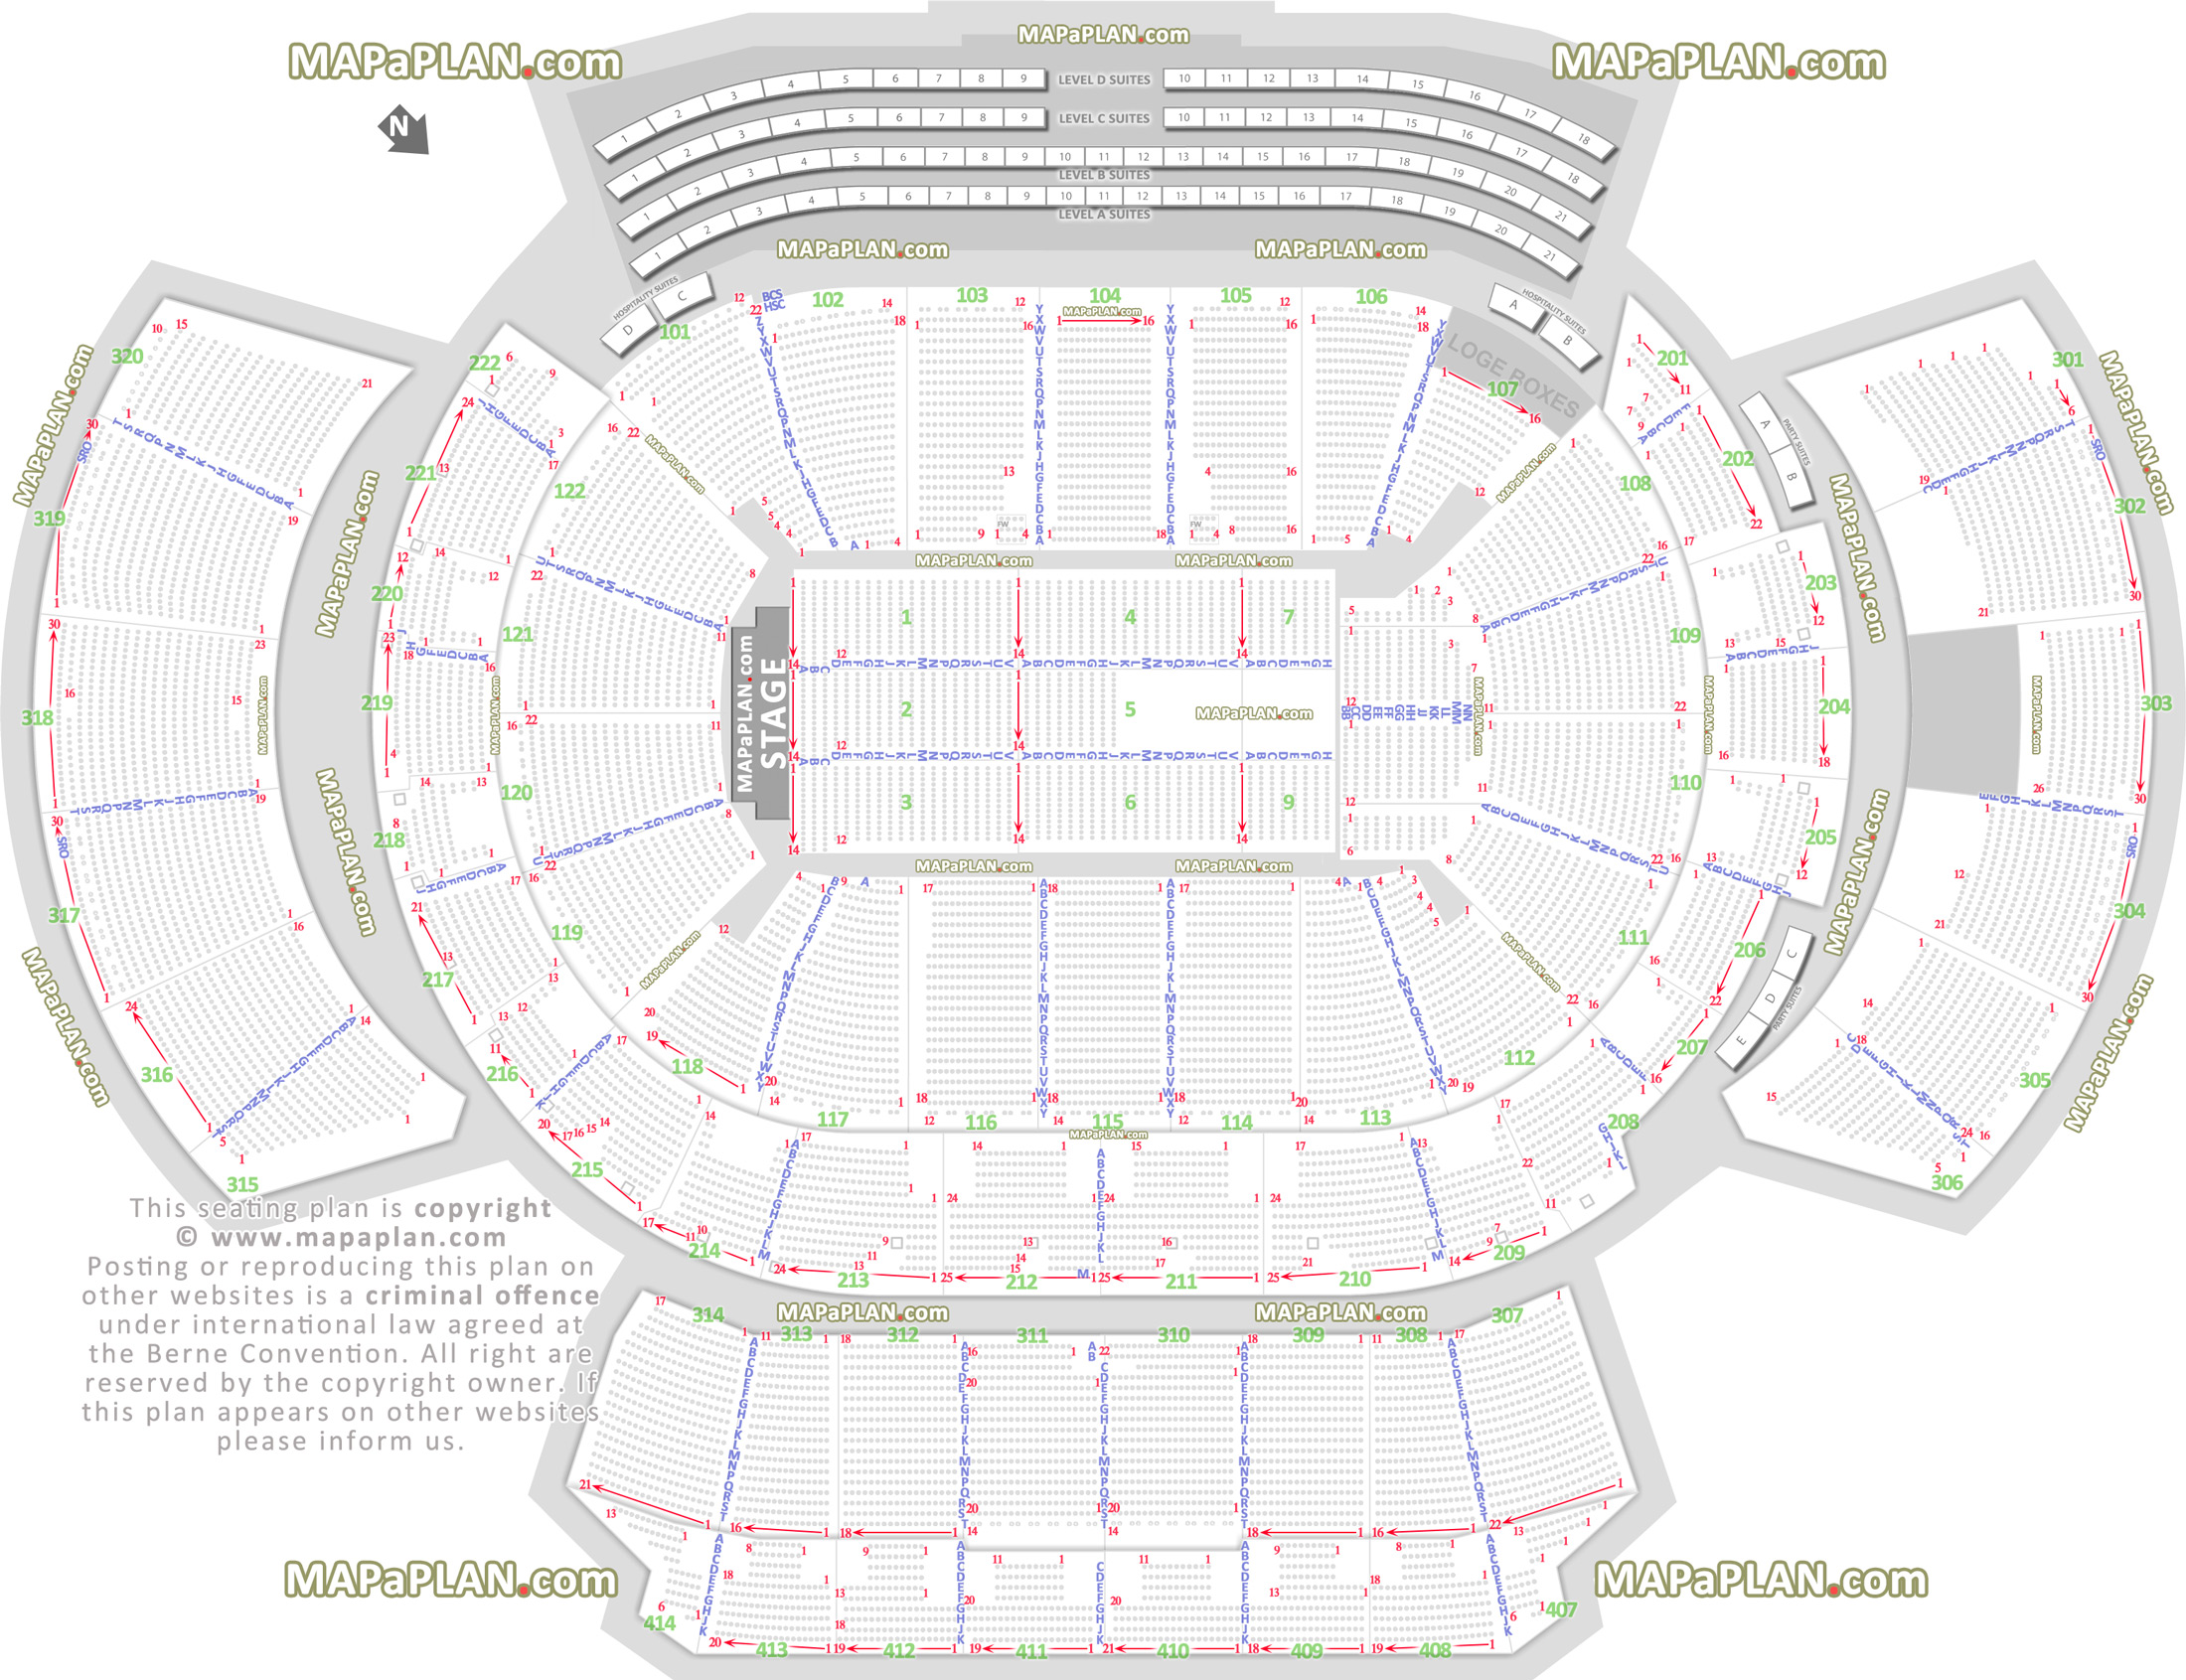 detailed seat row numbers end stage full concert sections floor plan arena lower upper level layout Atlanta Philips Arena seating chart